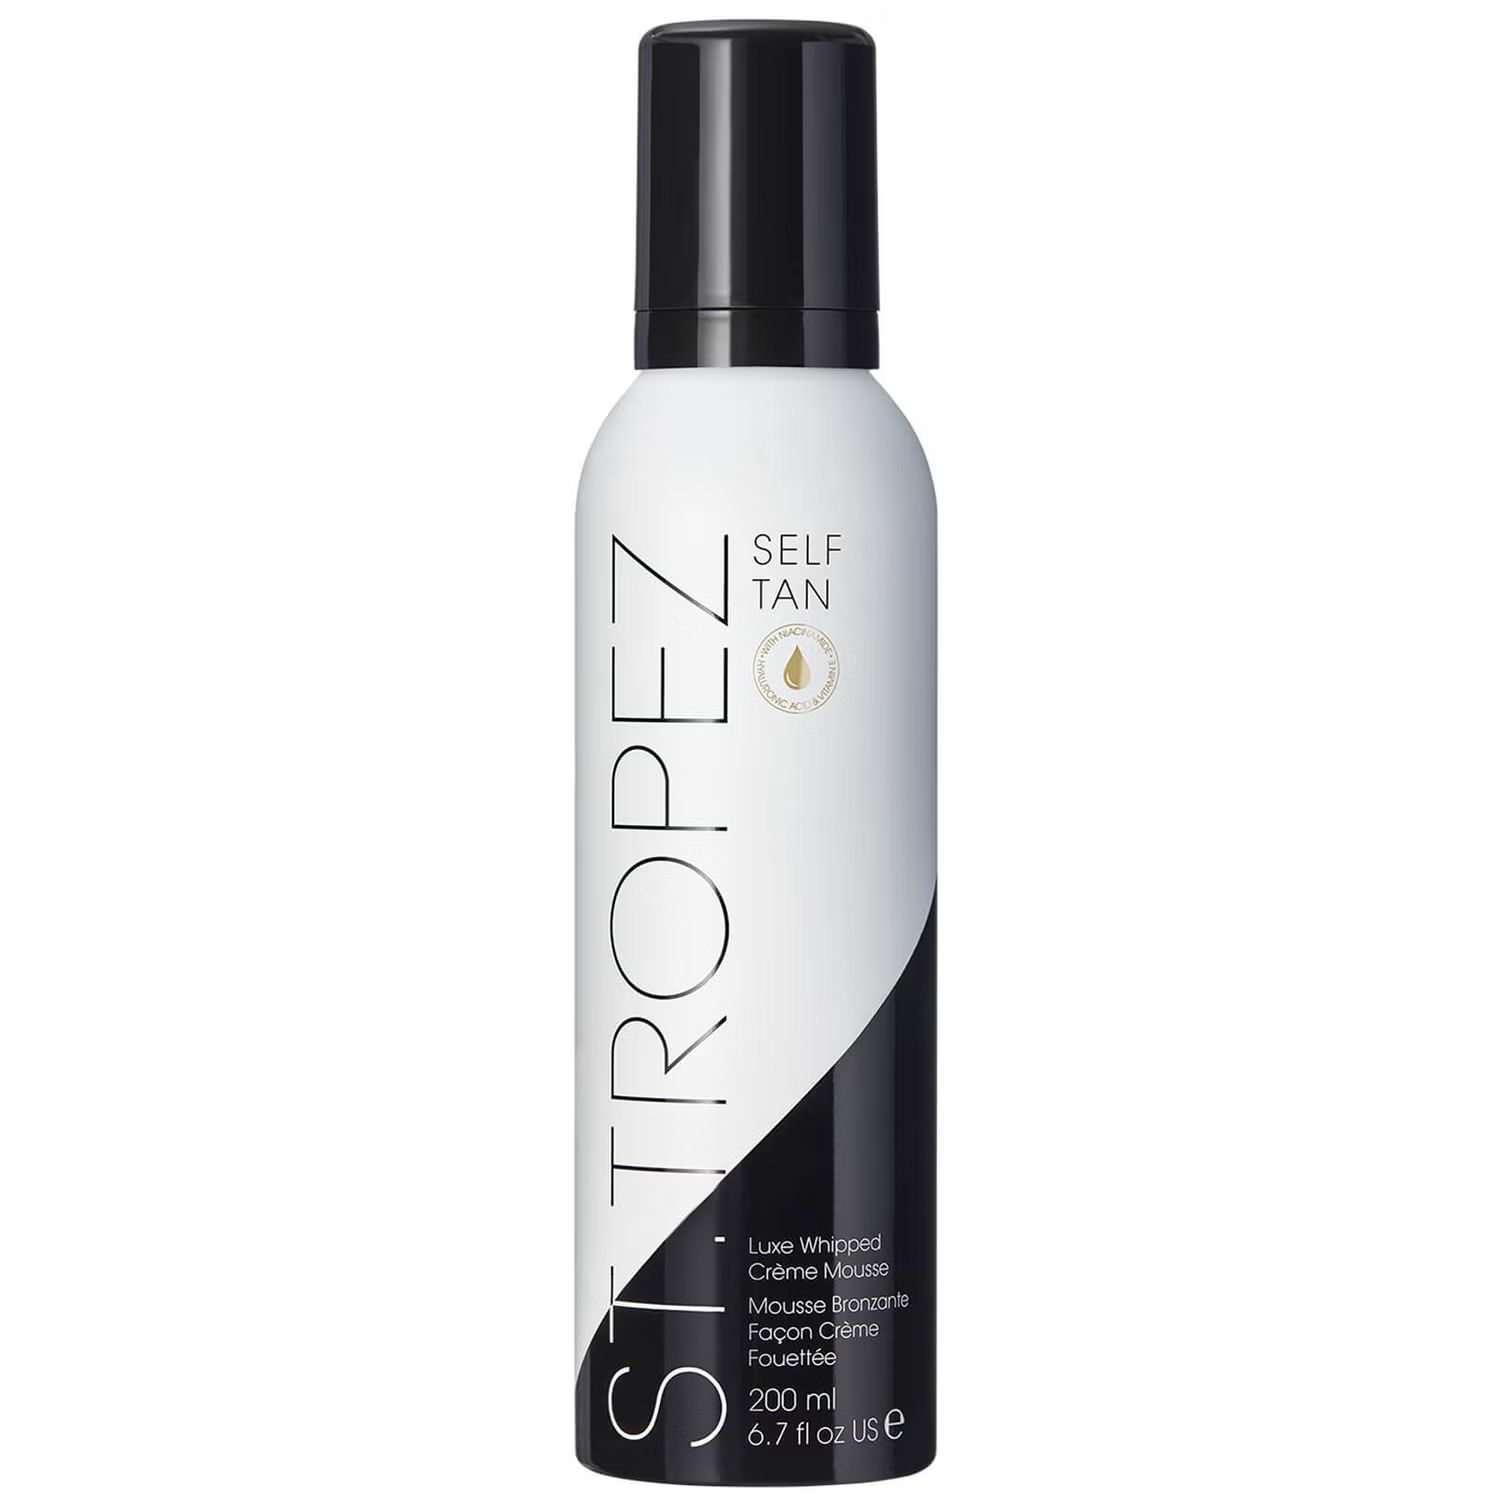 St. Tropez Tan Luxe Whipped Crème Mousse 200ml | Look Fantastic (UK)